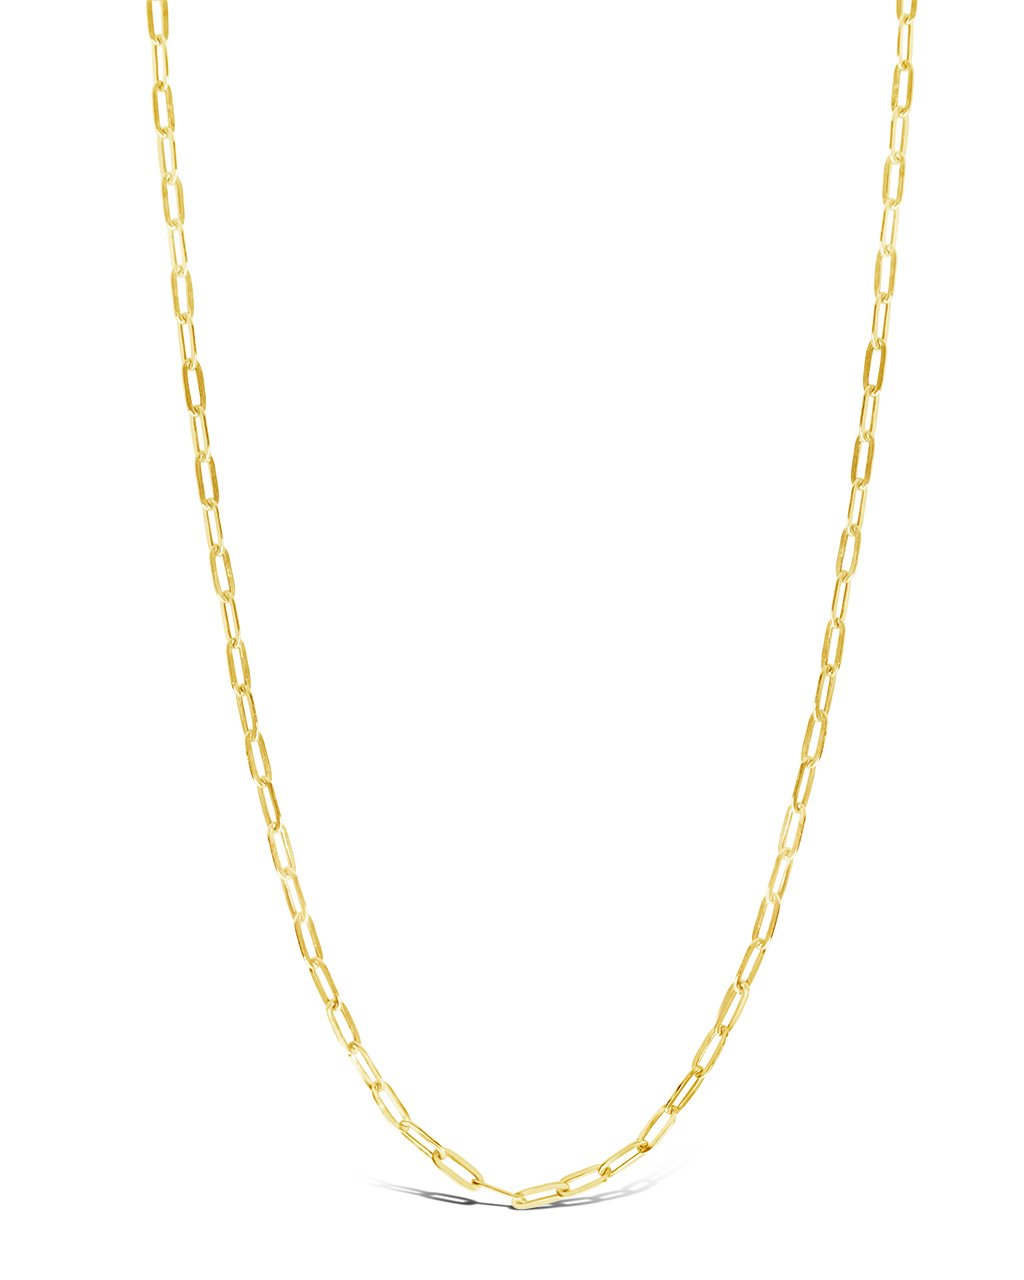 Solid 14K Yellow Gold Filled 3.1 mm Paperclip Chain Necklace - Minimalist Jewelry for Women